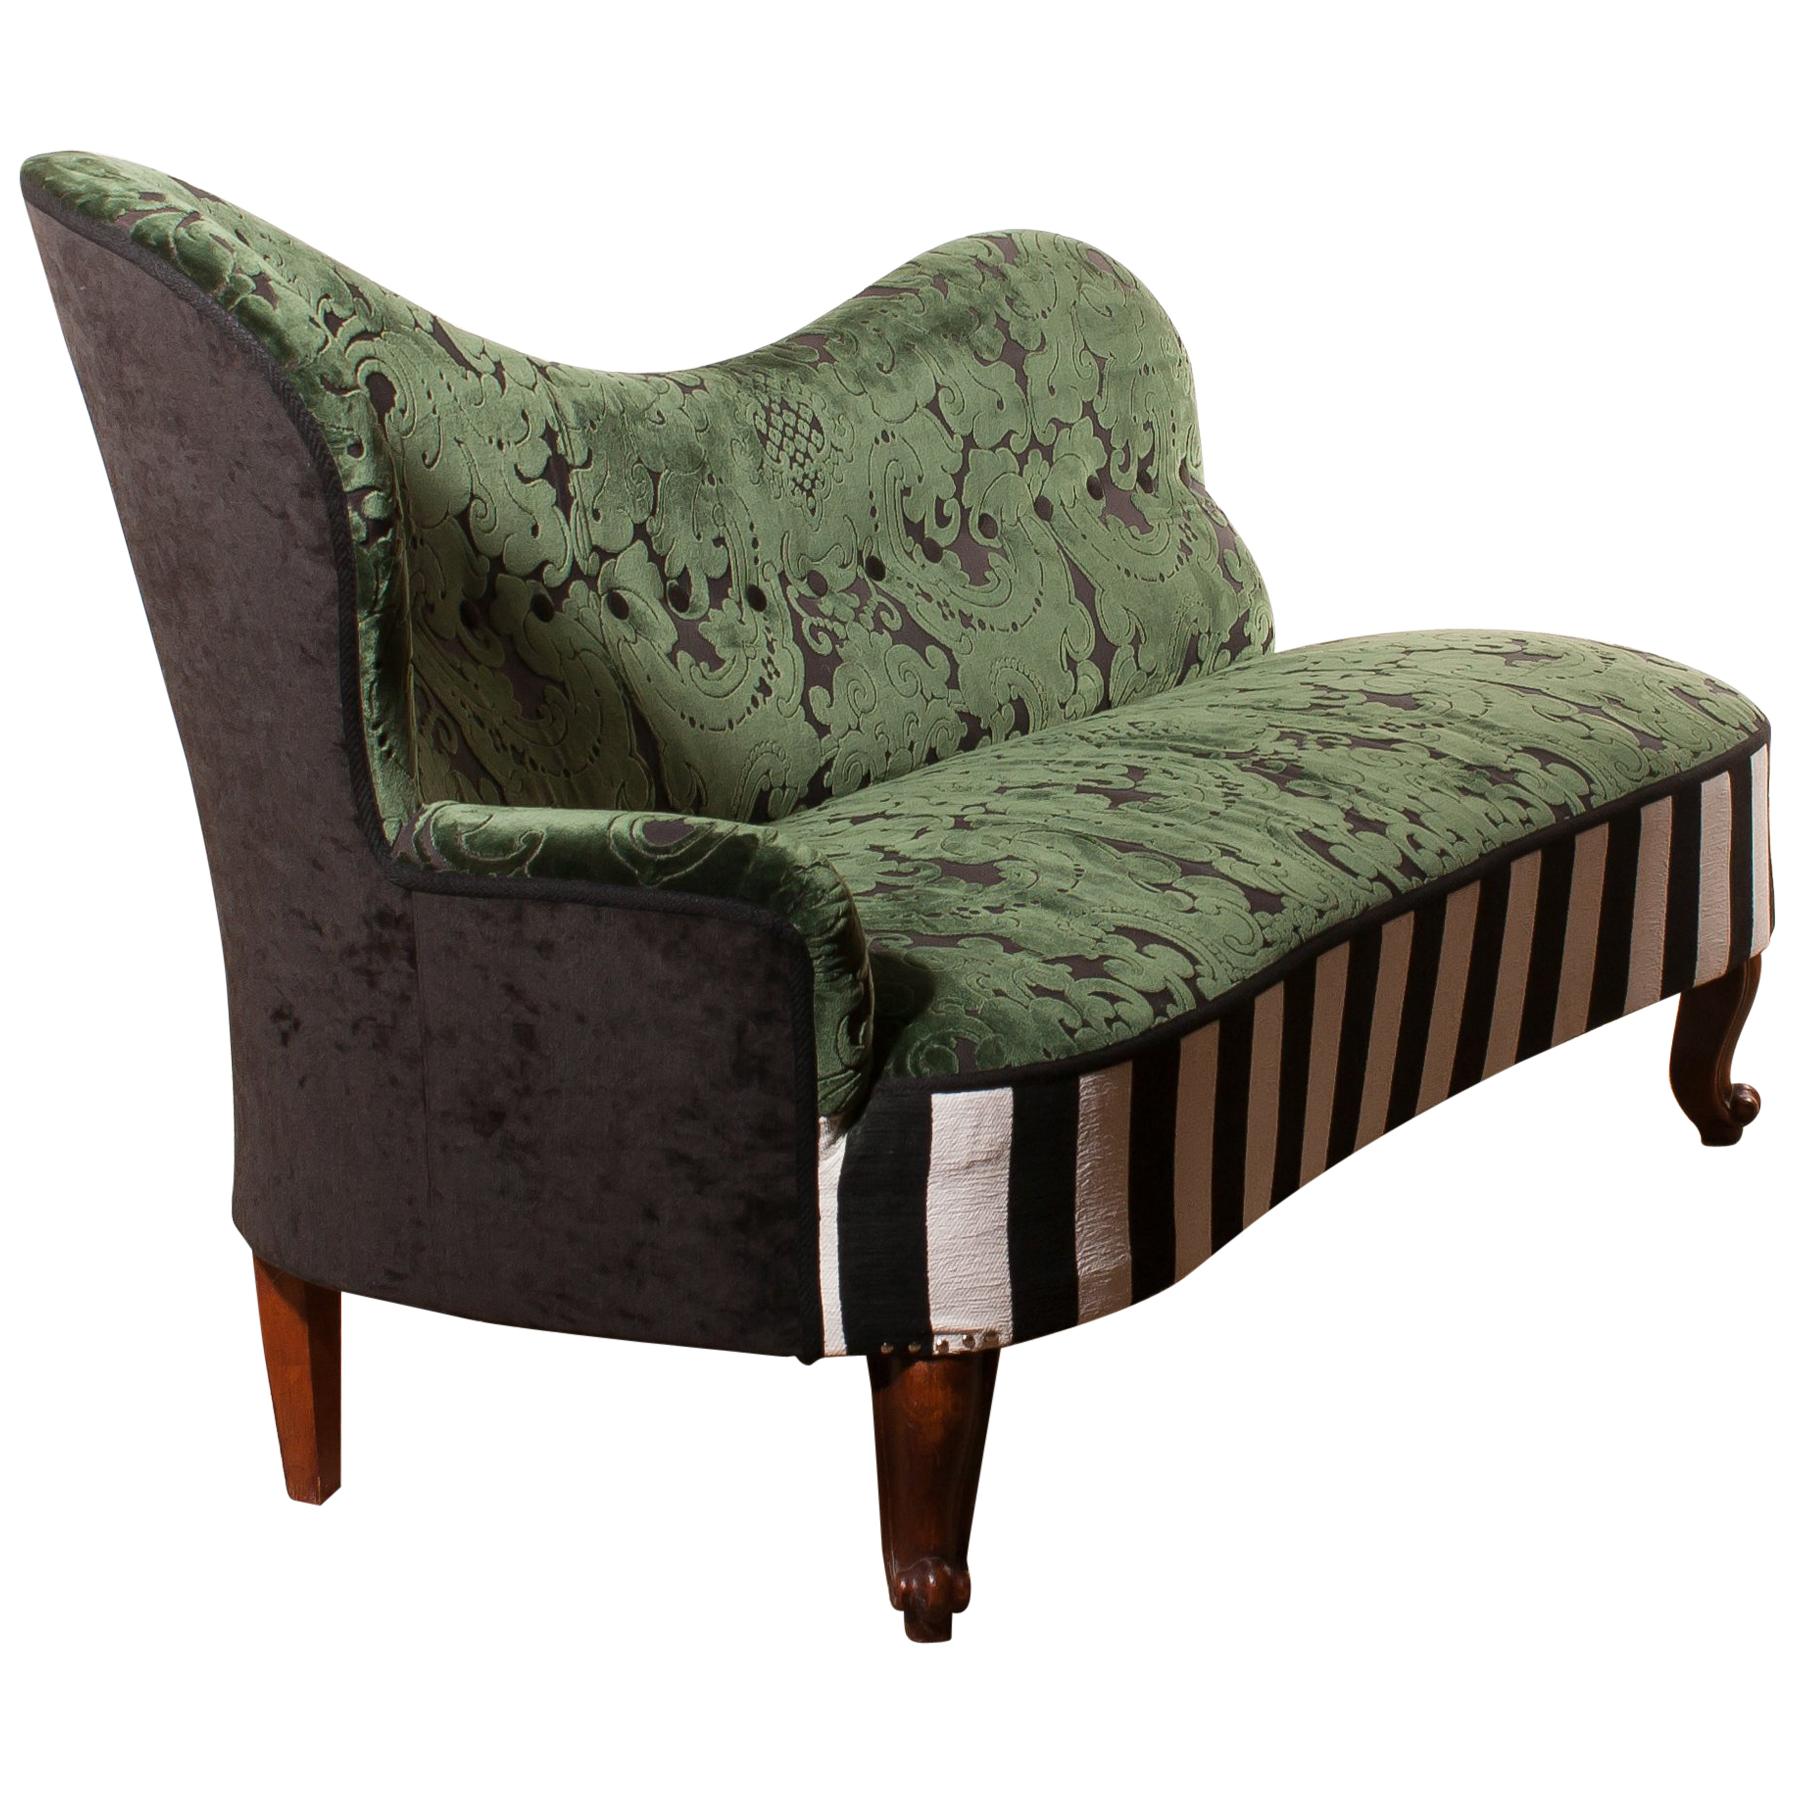 1950s Green Jacquard Velvet and Velours Piano Stripe Sofa or Chaise Lounge (Art nouveau)